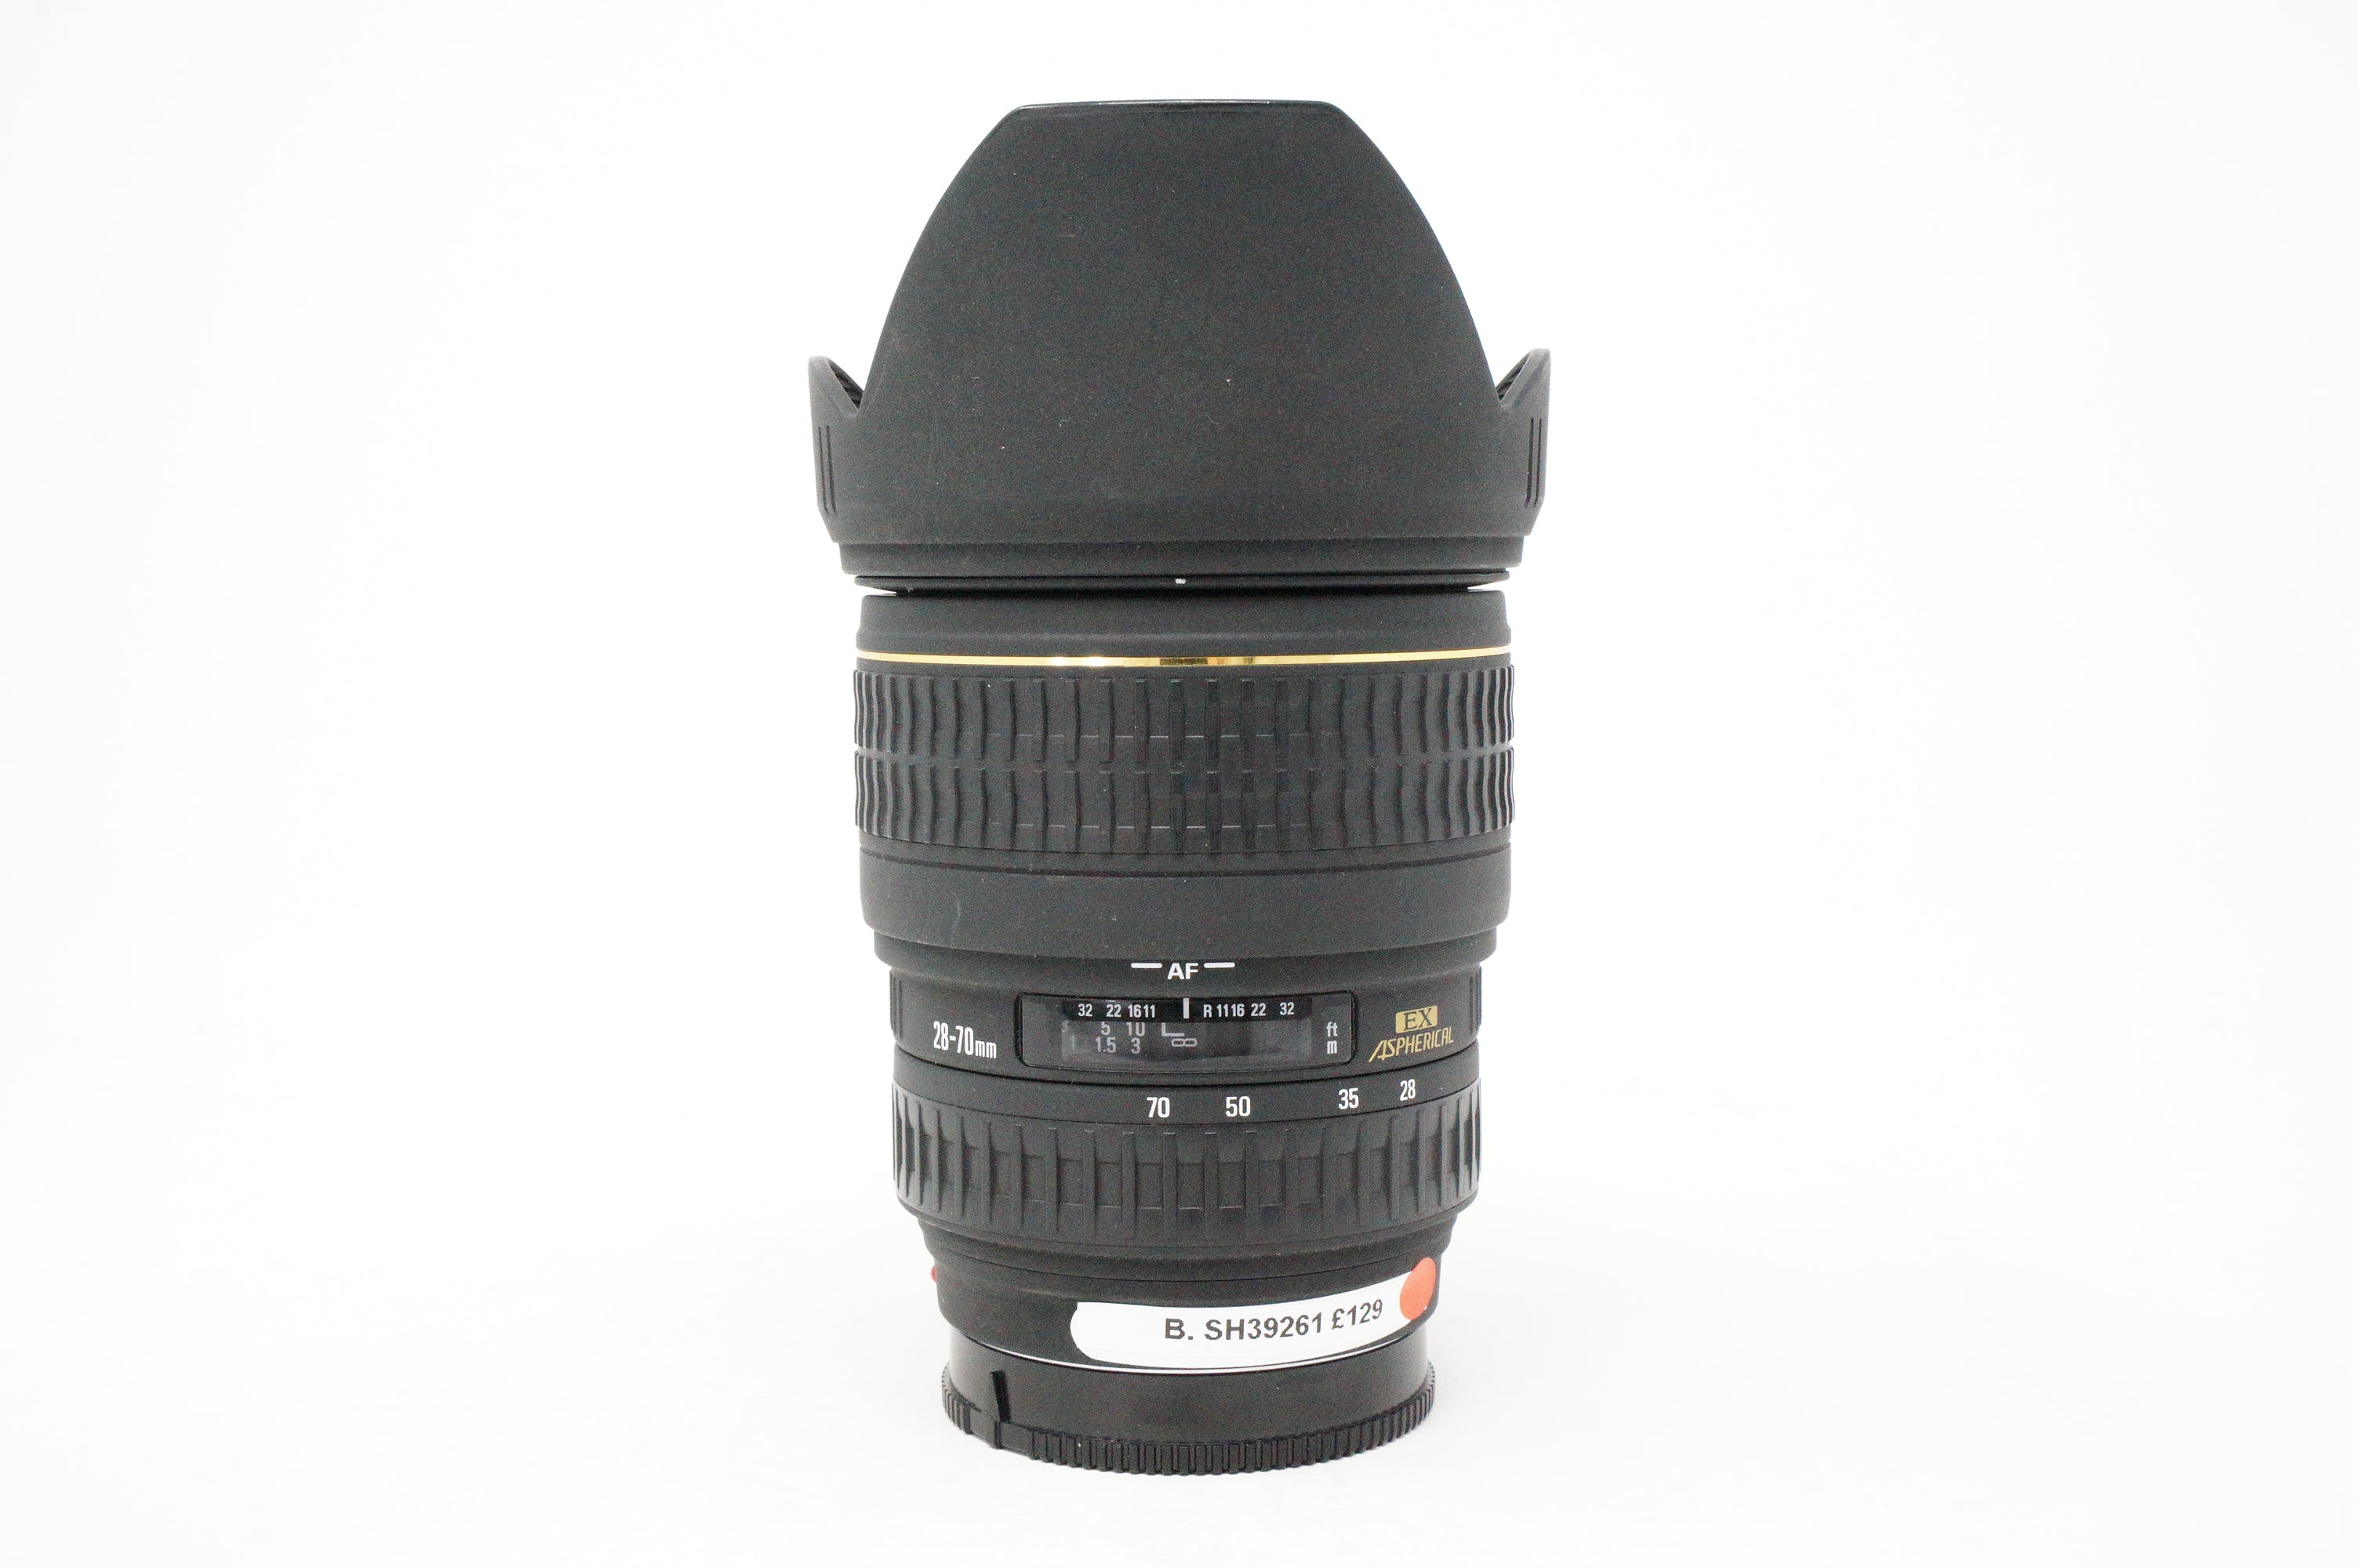 Product Image of Used Sigma EX 28-70mm F/2.8 DF lens for Sony A-Mount (SH39261)